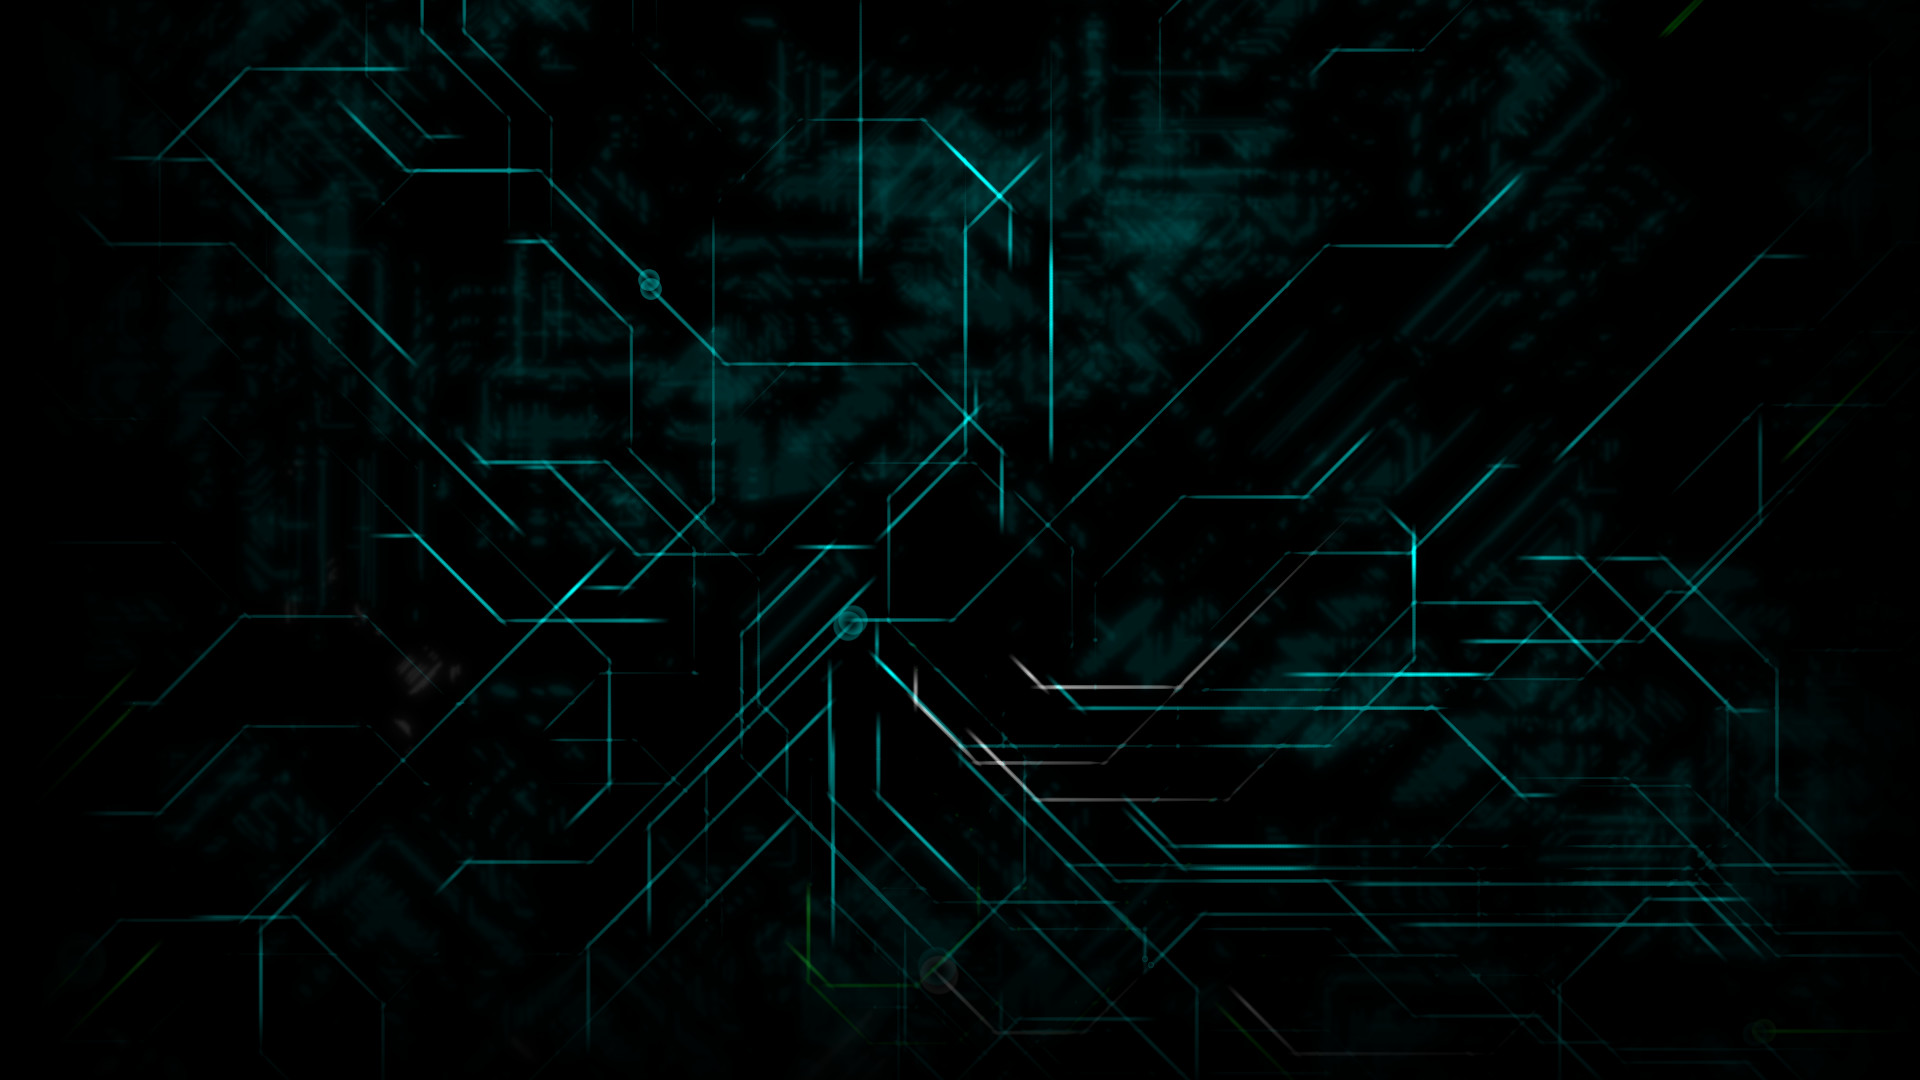 1920x1080 Really Cool Desktop Backgrounds Hd